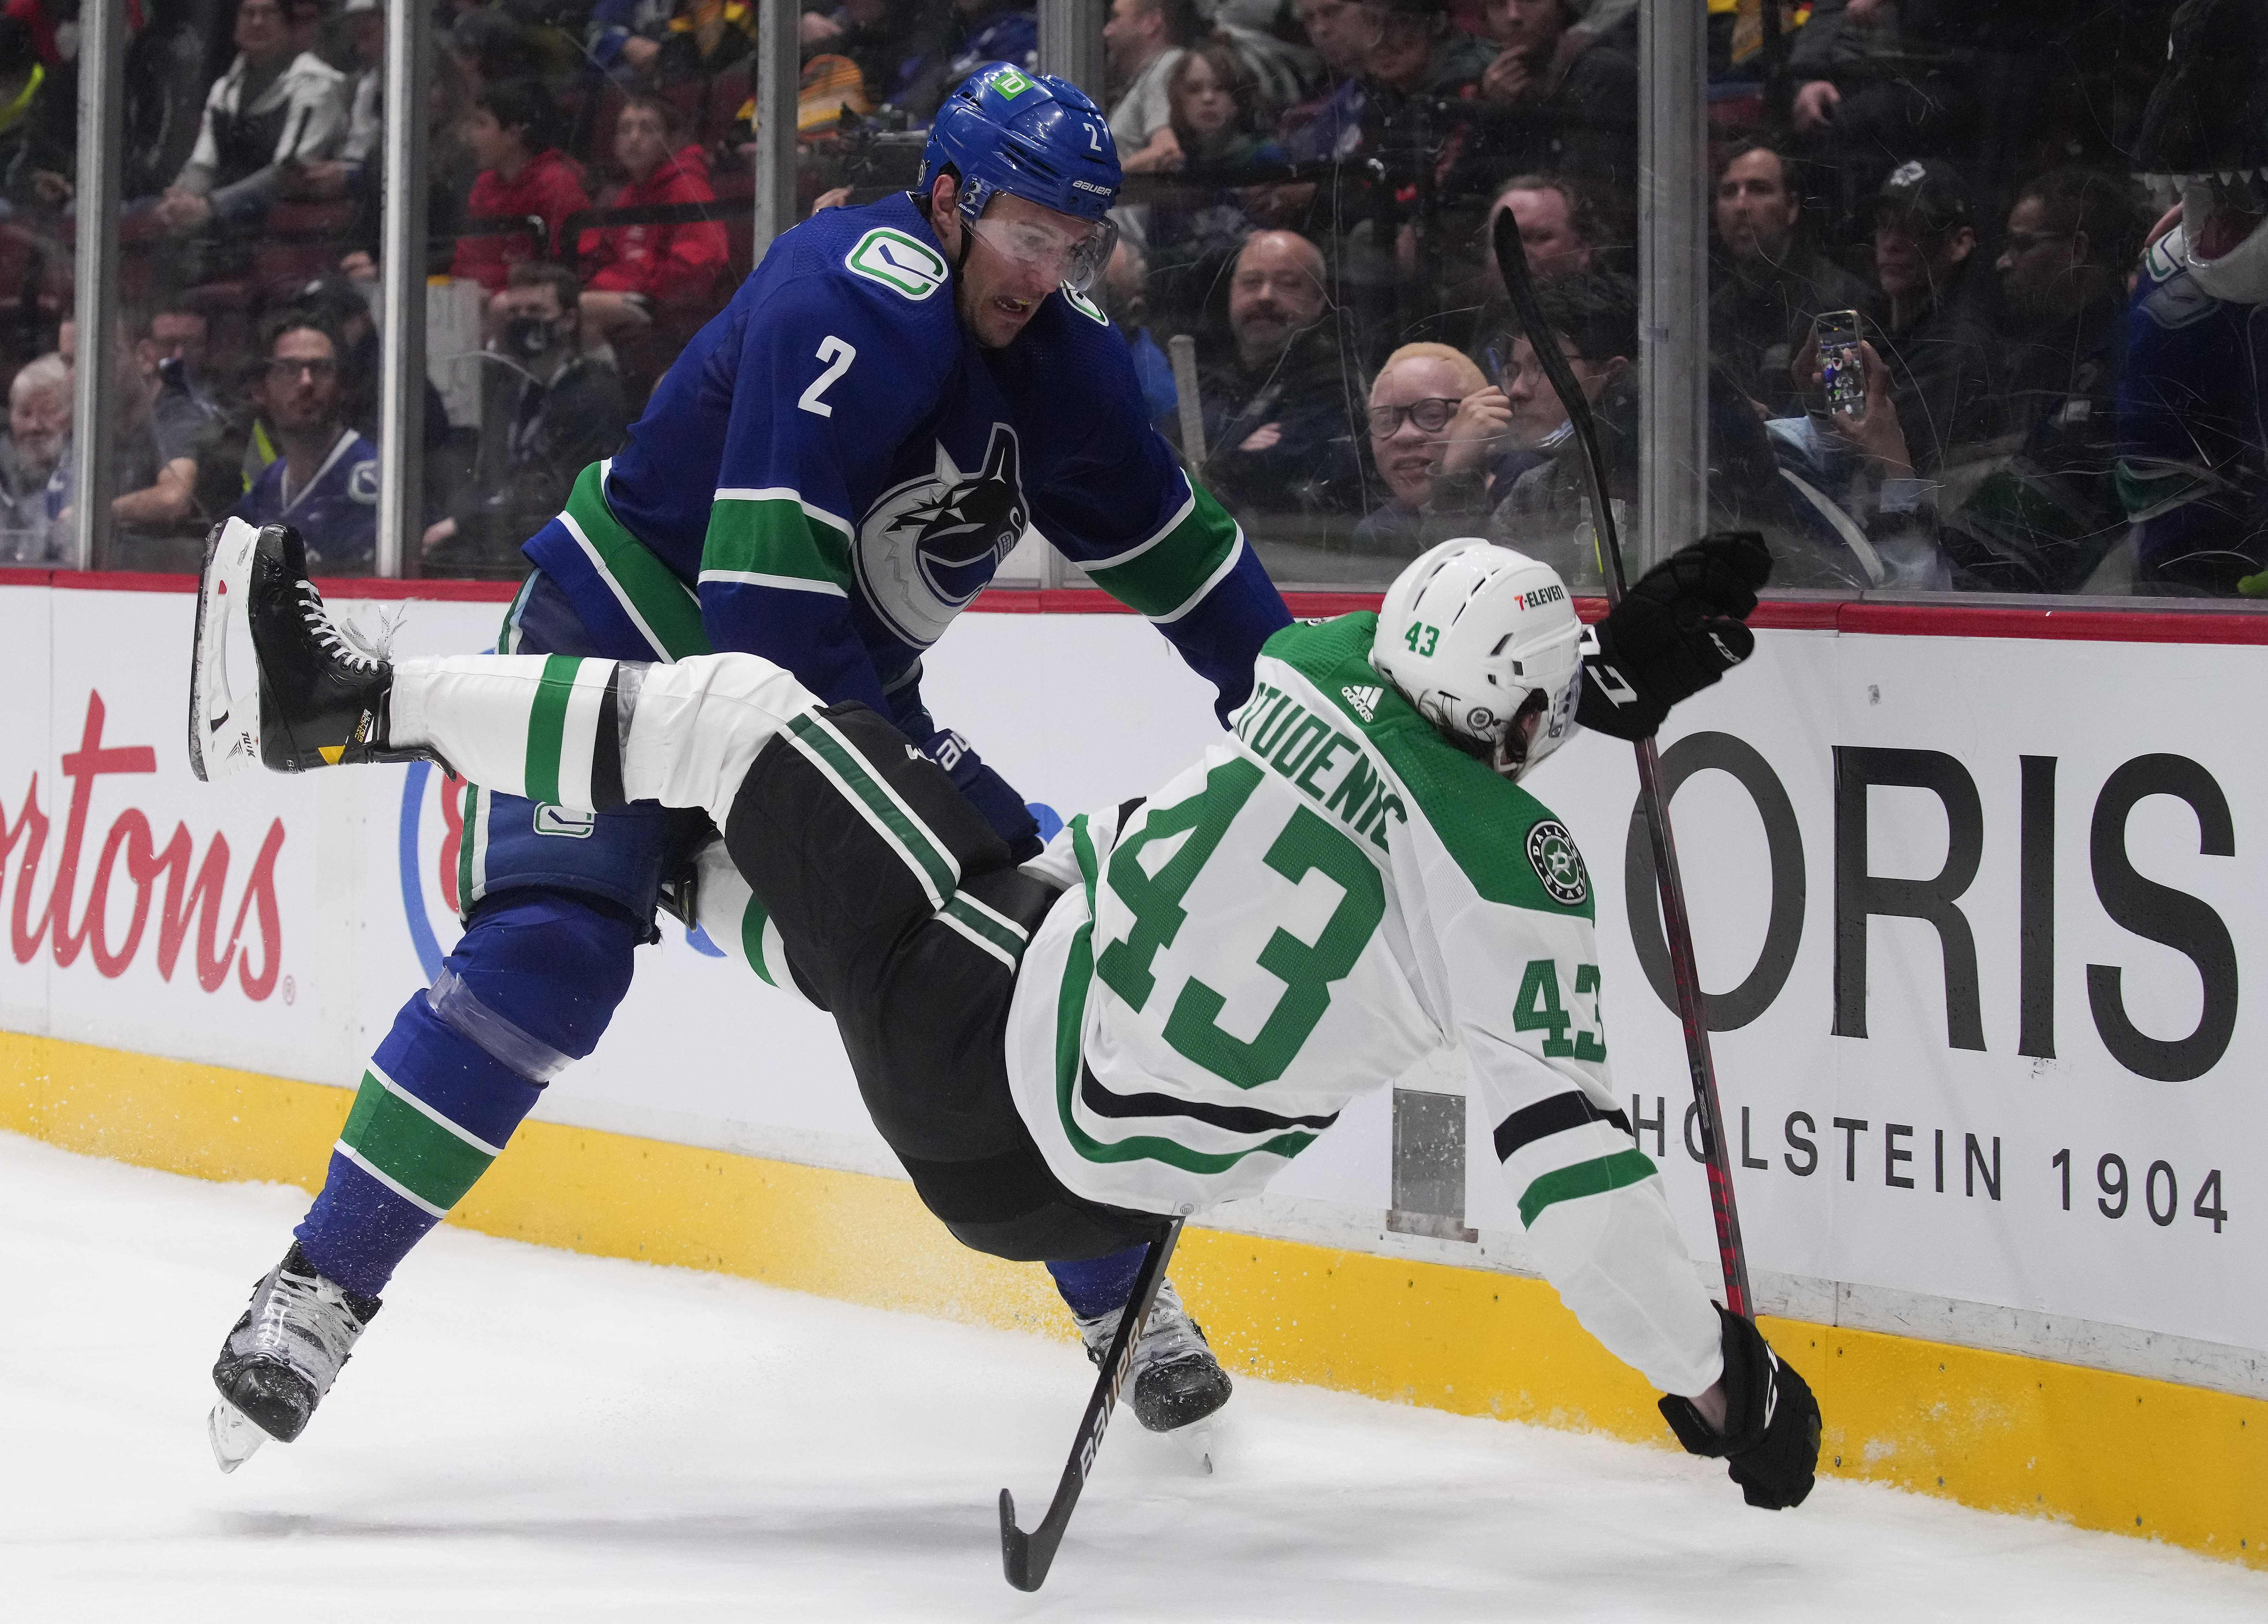 Jersey tossed on the ice is sign of the times for troubled Canucks